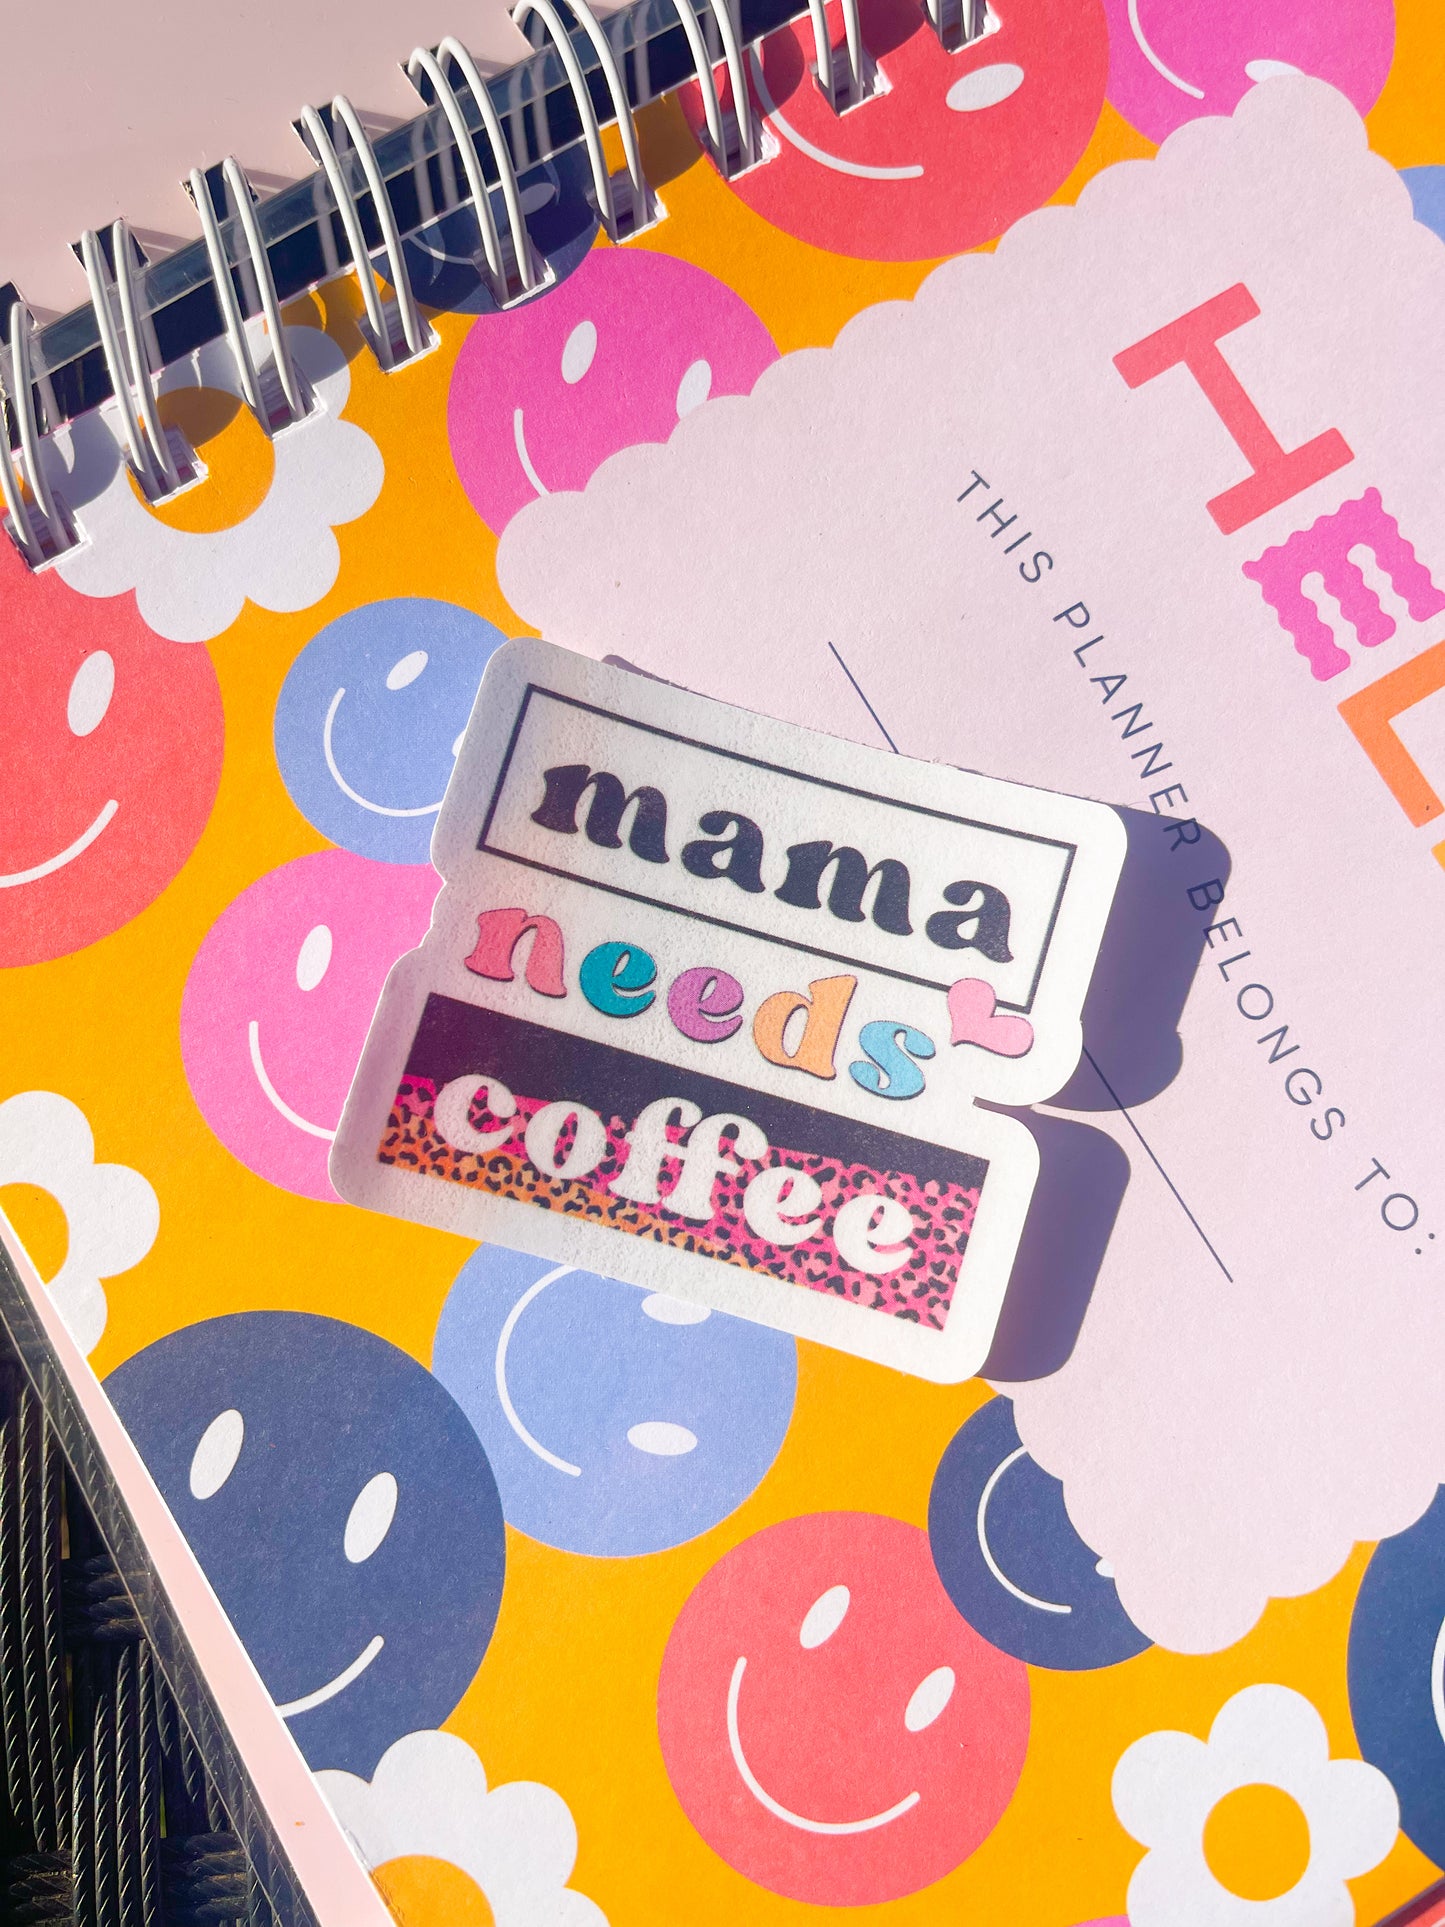 Mom Mama Mother Decals